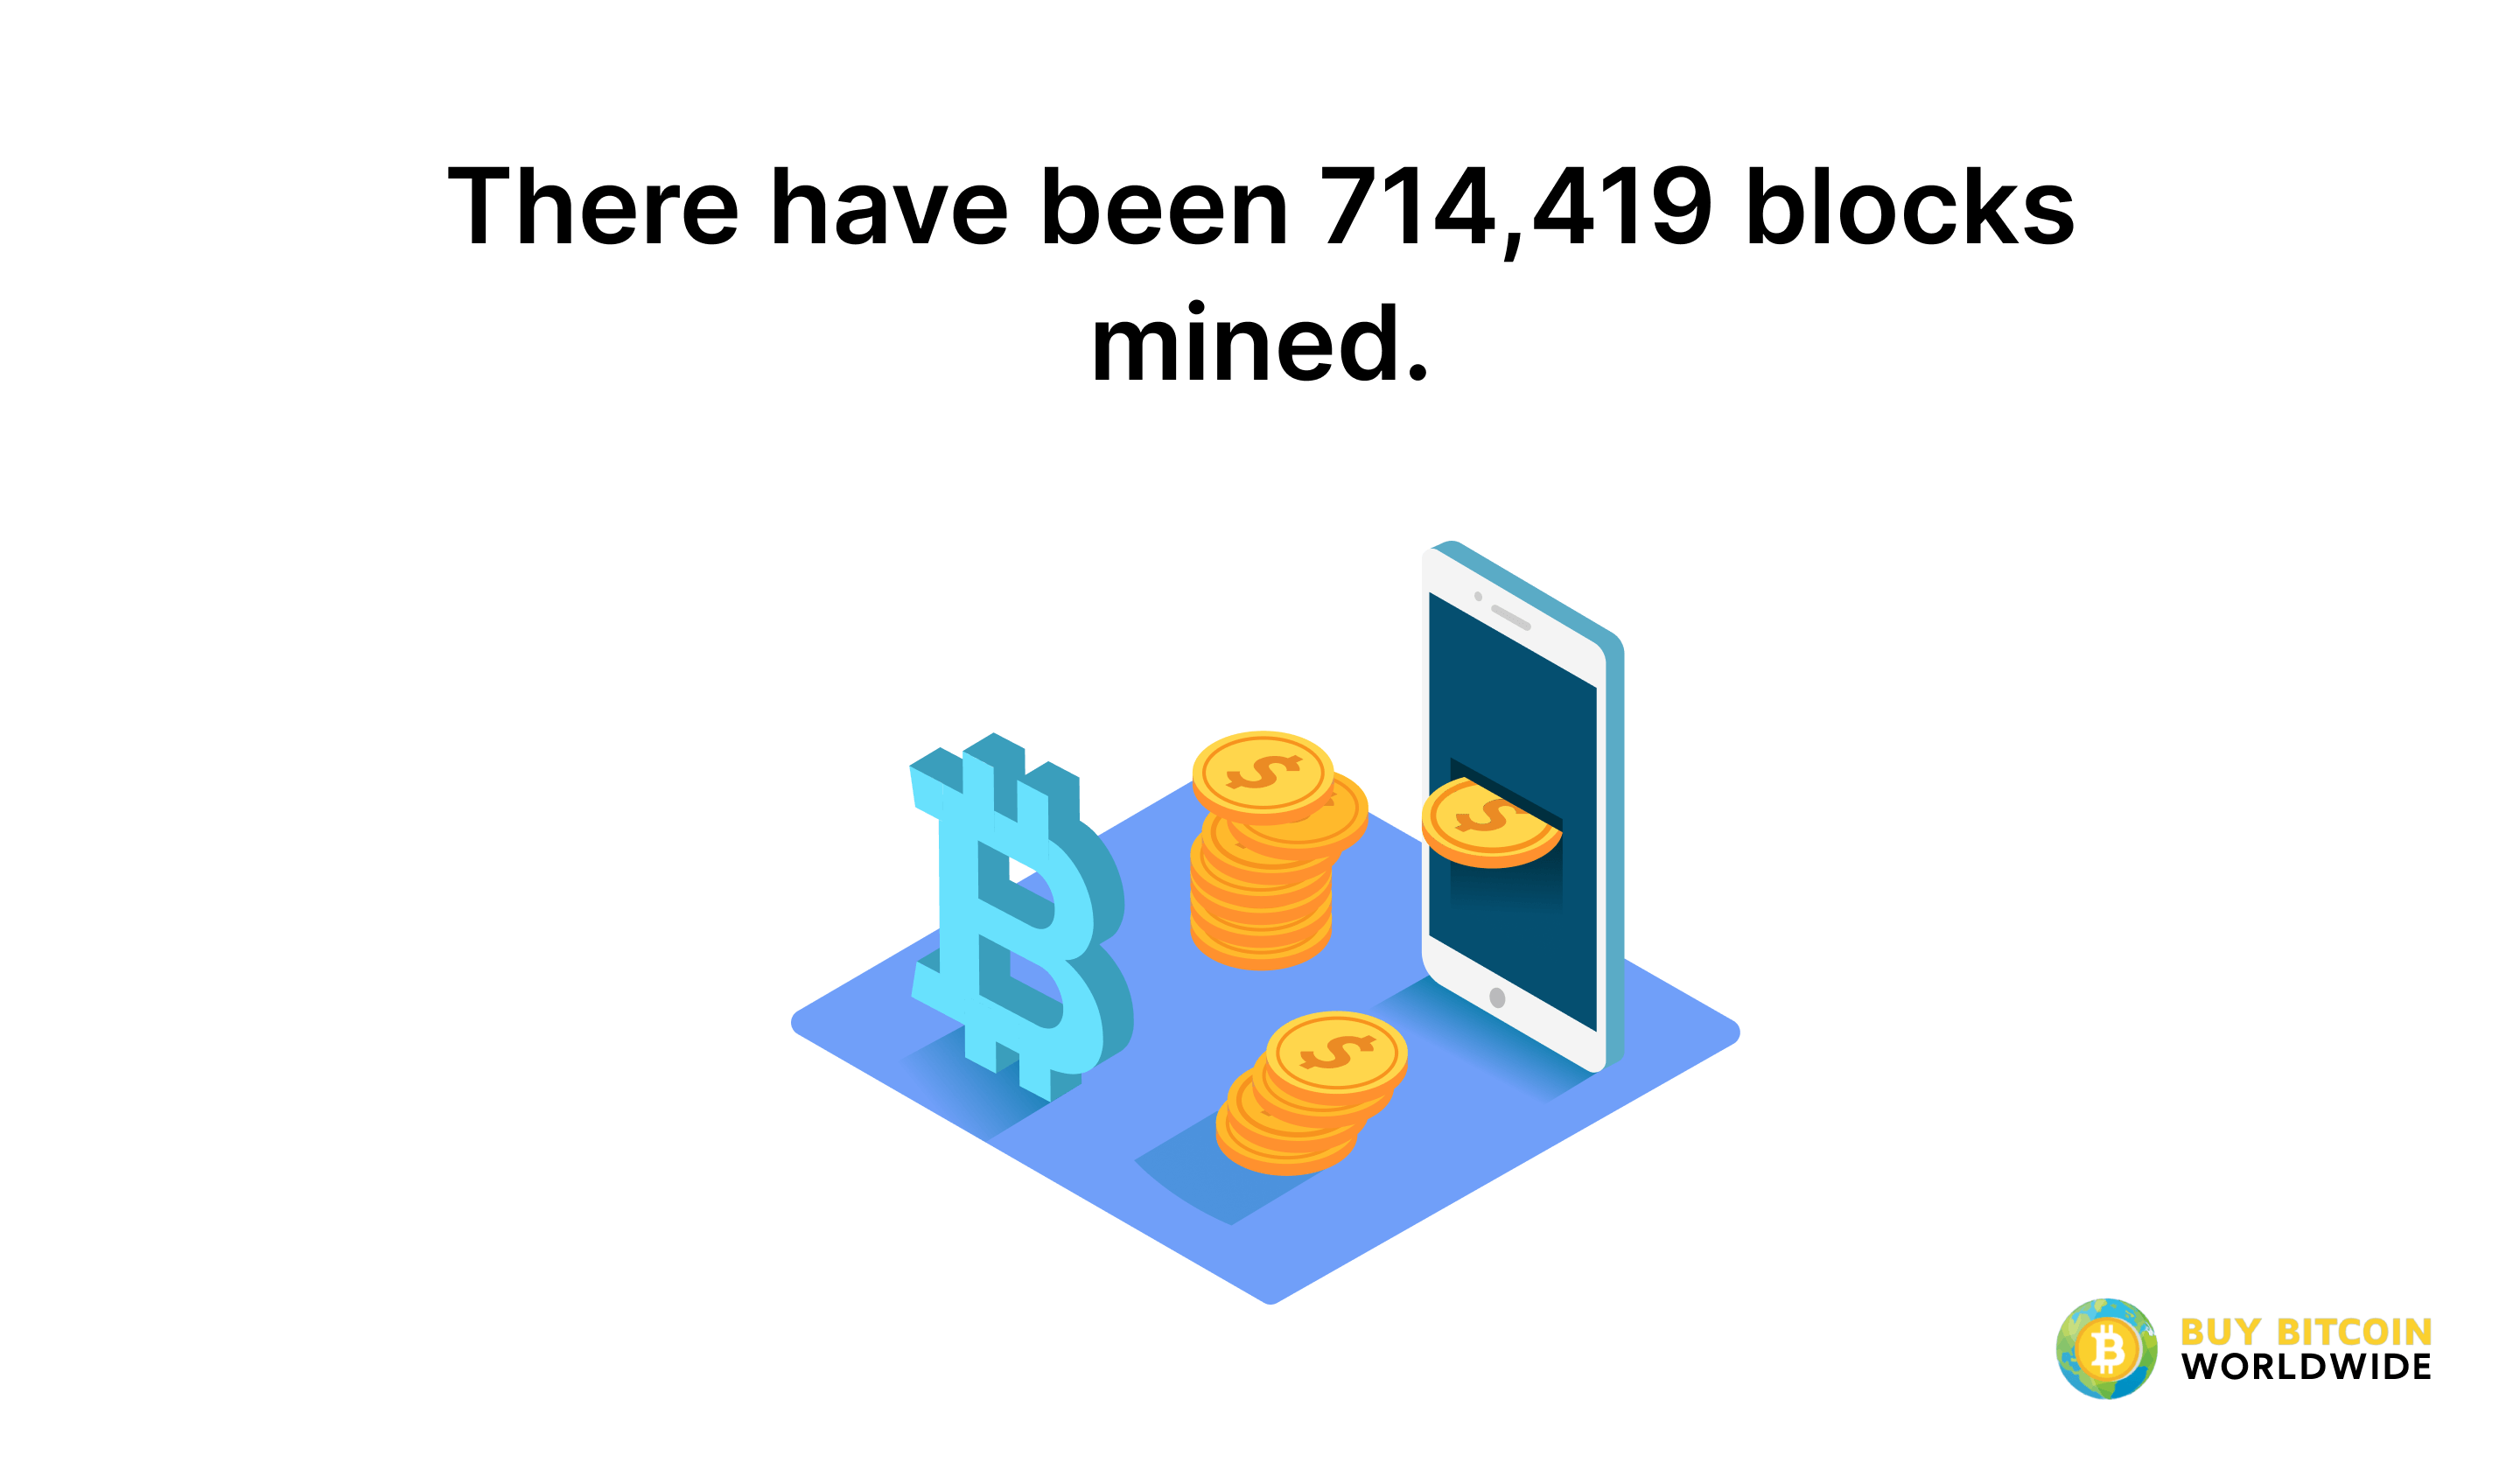 how many bitcoins have been mined till now